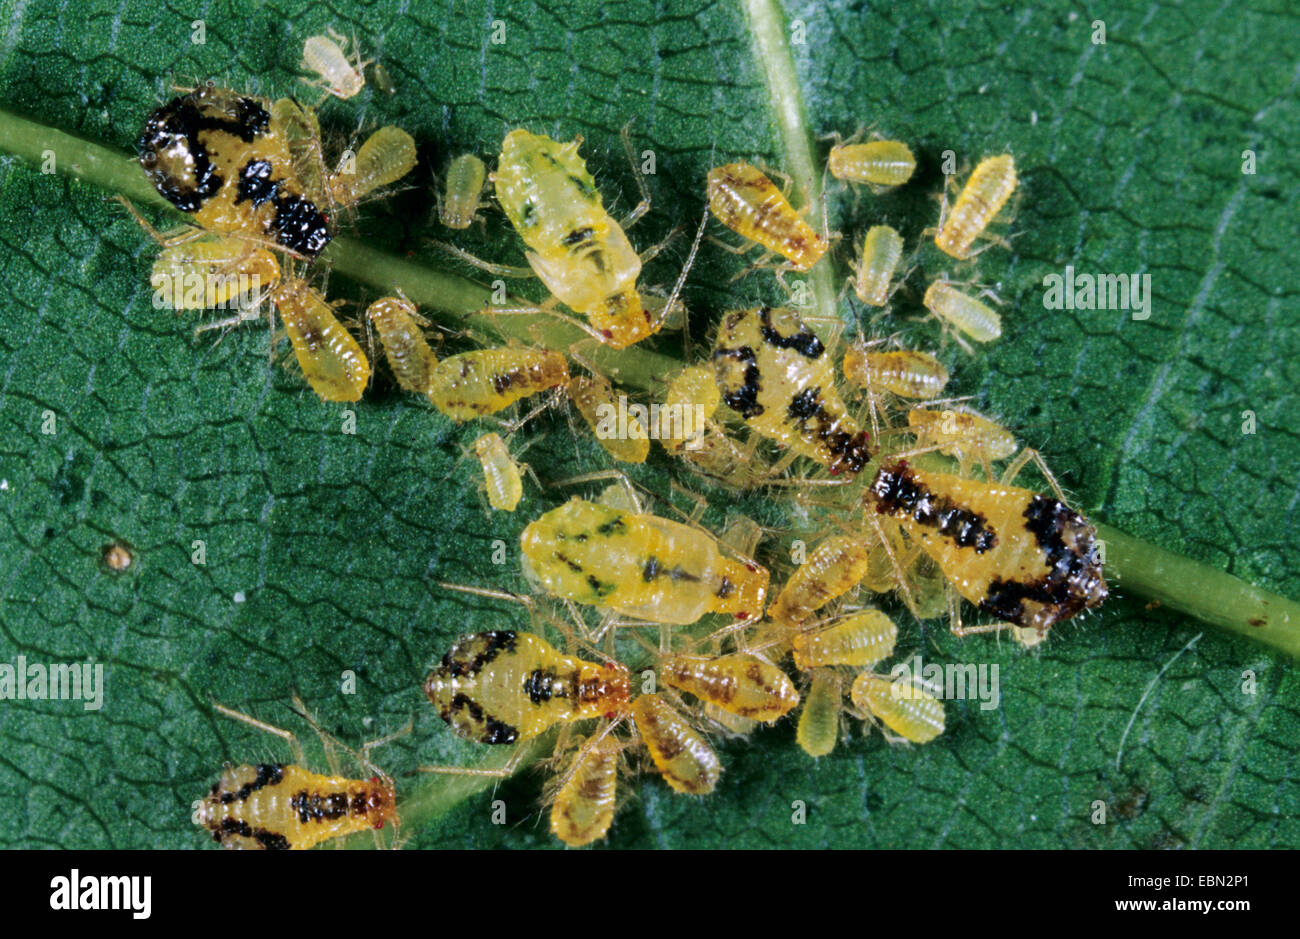 aphids and greenflies etc. (Aphidoidea), aphids on amaple leaf, Acer pseudoplatanus, Germany Stock Photo